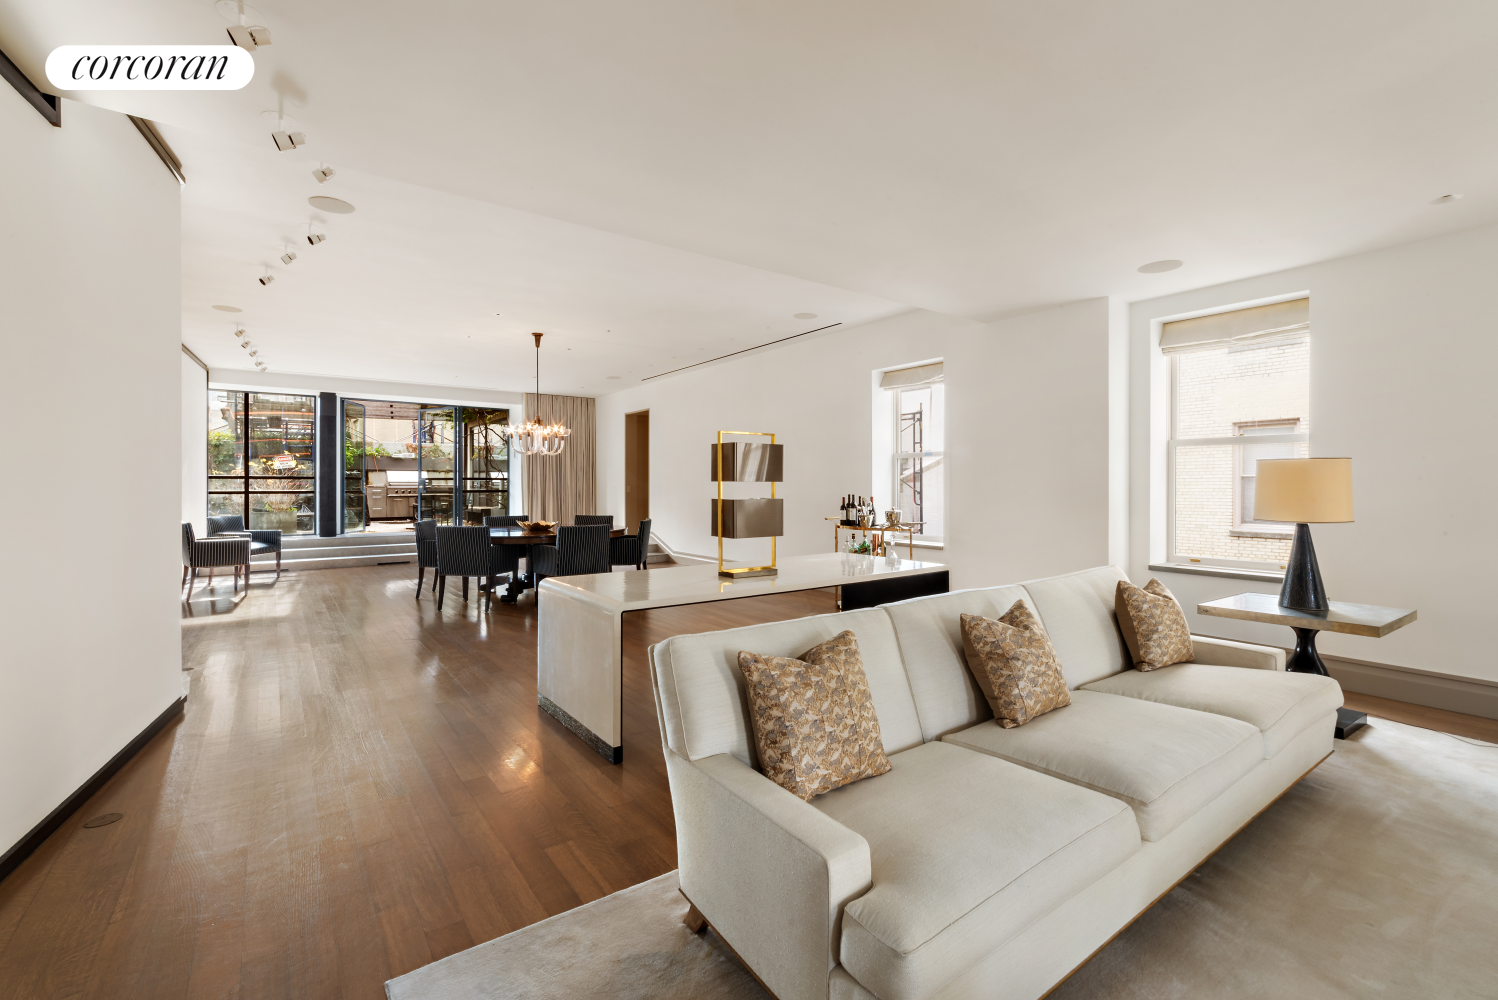 3 East 75th Street Ph, Lenox Hill, Upper East Side, NYC - 3 Bedrooms  
3.5 Bathrooms  
9 Rooms - 